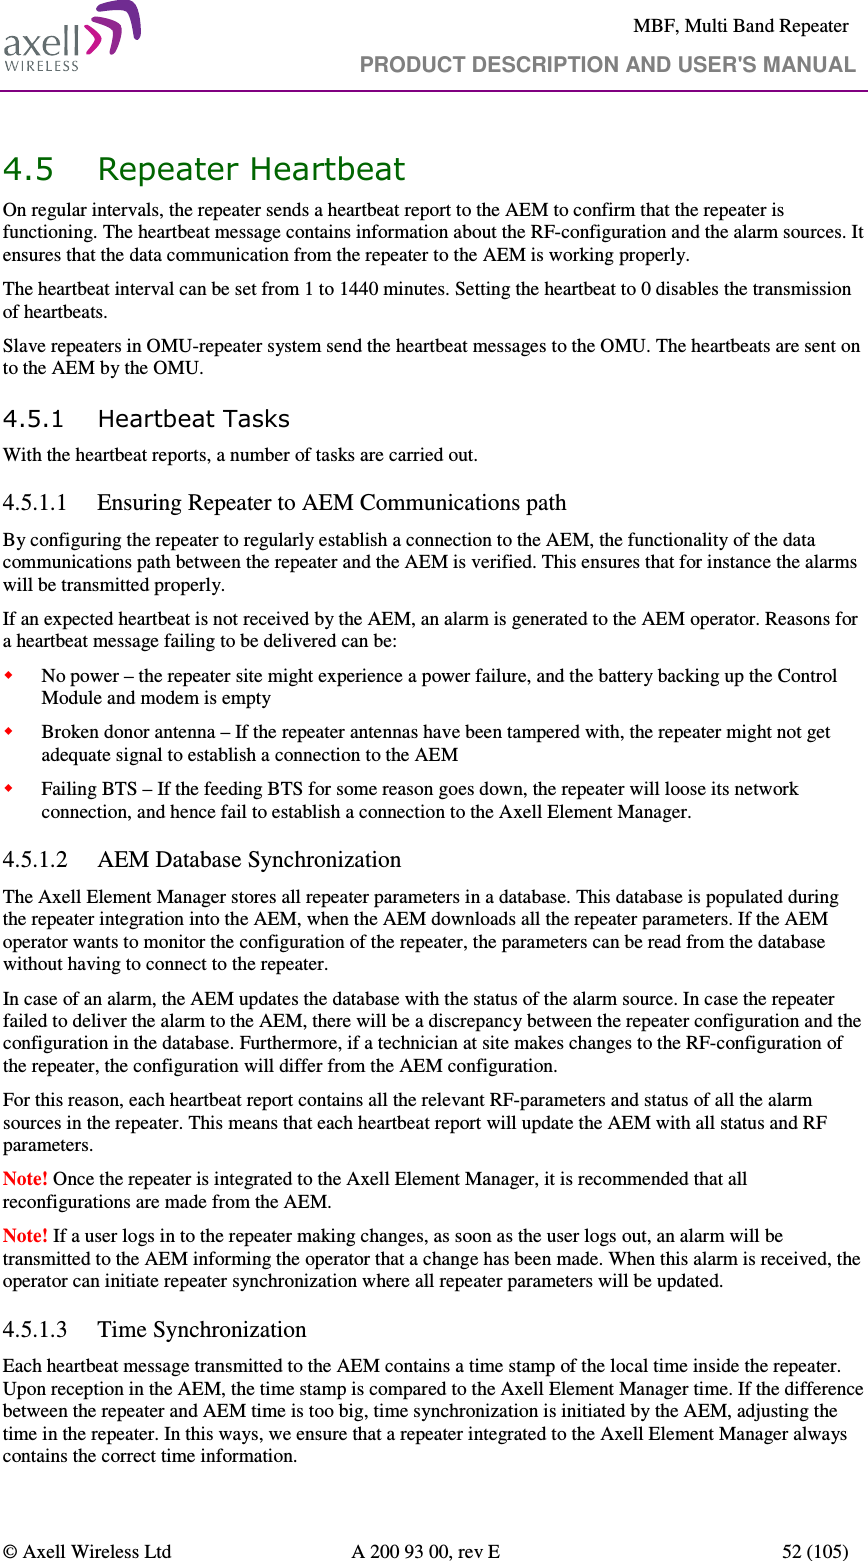     MBF, Multi Band Repeater                                     PRODUCT DESCRIPTION AND USER&apos;S MANUAL   © Axell Wireless Ltd  A 200 93 00, rev E  52 (105)  4.5 Repeater Heartbeat  On regular intervals, the repeater sends a heartbeat report to the AEM to confirm that the repeater is functioning. The heartbeat message contains information about the RF-configuration and the alarm sources. It ensures that the data communication from the repeater to the AEM is working properly. The heartbeat interval can be set from 1 to 1440 minutes. Setting the heartbeat to 0 disables the transmission of heartbeats.  Slave repeaters in OMU-repeater system send the heartbeat messages to the OMU. The heartbeats are sent on to the AEM by the OMU. 4.5.1 Heartbeat Tasks With the heartbeat reports, a number of tasks are carried out. 4.5.1.1 Ensuring Repeater to AEM Communications path By configuring the repeater to regularly establish a connection to the AEM, the functionality of the data communications path between the repeater and the AEM is verified. This ensures that for instance the alarms will be transmitted properly. If an expected heartbeat is not received by the AEM, an alarm is generated to the AEM operator. Reasons for a heartbeat message failing to be delivered can be:  No power – the repeater site might experience a power failure, and the battery backing up the Control Module and modem is empty  Broken donor antenna – If the repeater antennas have been tampered with, the repeater might not get adequate signal to establish a connection to the AEM  Failing BTS – If the feeding BTS for some reason goes down, the repeater will loose its network connection, and hence fail to establish a connection to the Axell Element Manager. 4.5.1.2 AEM Database Synchronization The Axell Element Manager stores all repeater parameters in a database. This database is populated during the repeater integration into the AEM, when the AEM downloads all the repeater parameters. If the AEM operator wants to monitor the configuration of the repeater, the parameters can be read from the database without having to connect to the repeater. In case of an alarm, the AEM updates the database with the status of the alarm source. In case the repeater failed to deliver the alarm to the AEM, there will be a discrepancy between the repeater configuration and the configuration in the database. Furthermore, if a technician at site makes changes to the RF-configuration of the repeater, the configuration will differ from the AEM configuration. For this reason, each heartbeat report contains all the relevant RF-parameters and status of all the alarm sources in the repeater. This means that each heartbeat report will update the AEM with all status and RF parameters. Note! Once the repeater is integrated to the Axell Element Manager, it is recommended that all reconfigurations are made from the AEM.  Note! If a user logs in to the repeater making changes, as soon as the user logs out, an alarm will be transmitted to the AEM informing the operator that a change has been made. When this alarm is received, the operator can initiate repeater synchronization where all repeater parameters will be updated. 4.5.1.3 Time Synchronization Each heartbeat message transmitted to the AEM contains a time stamp of the local time inside the repeater. Upon reception in the AEM, the time stamp is compared to the Axell Element Manager time. If the difference between the repeater and AEM time is too big, time synchronization is initiated by the AEM, adjusting the time in the repeater. In this ways, we ensure that a repeater integrated to the Axell Element Manager always contains the correct time information.  